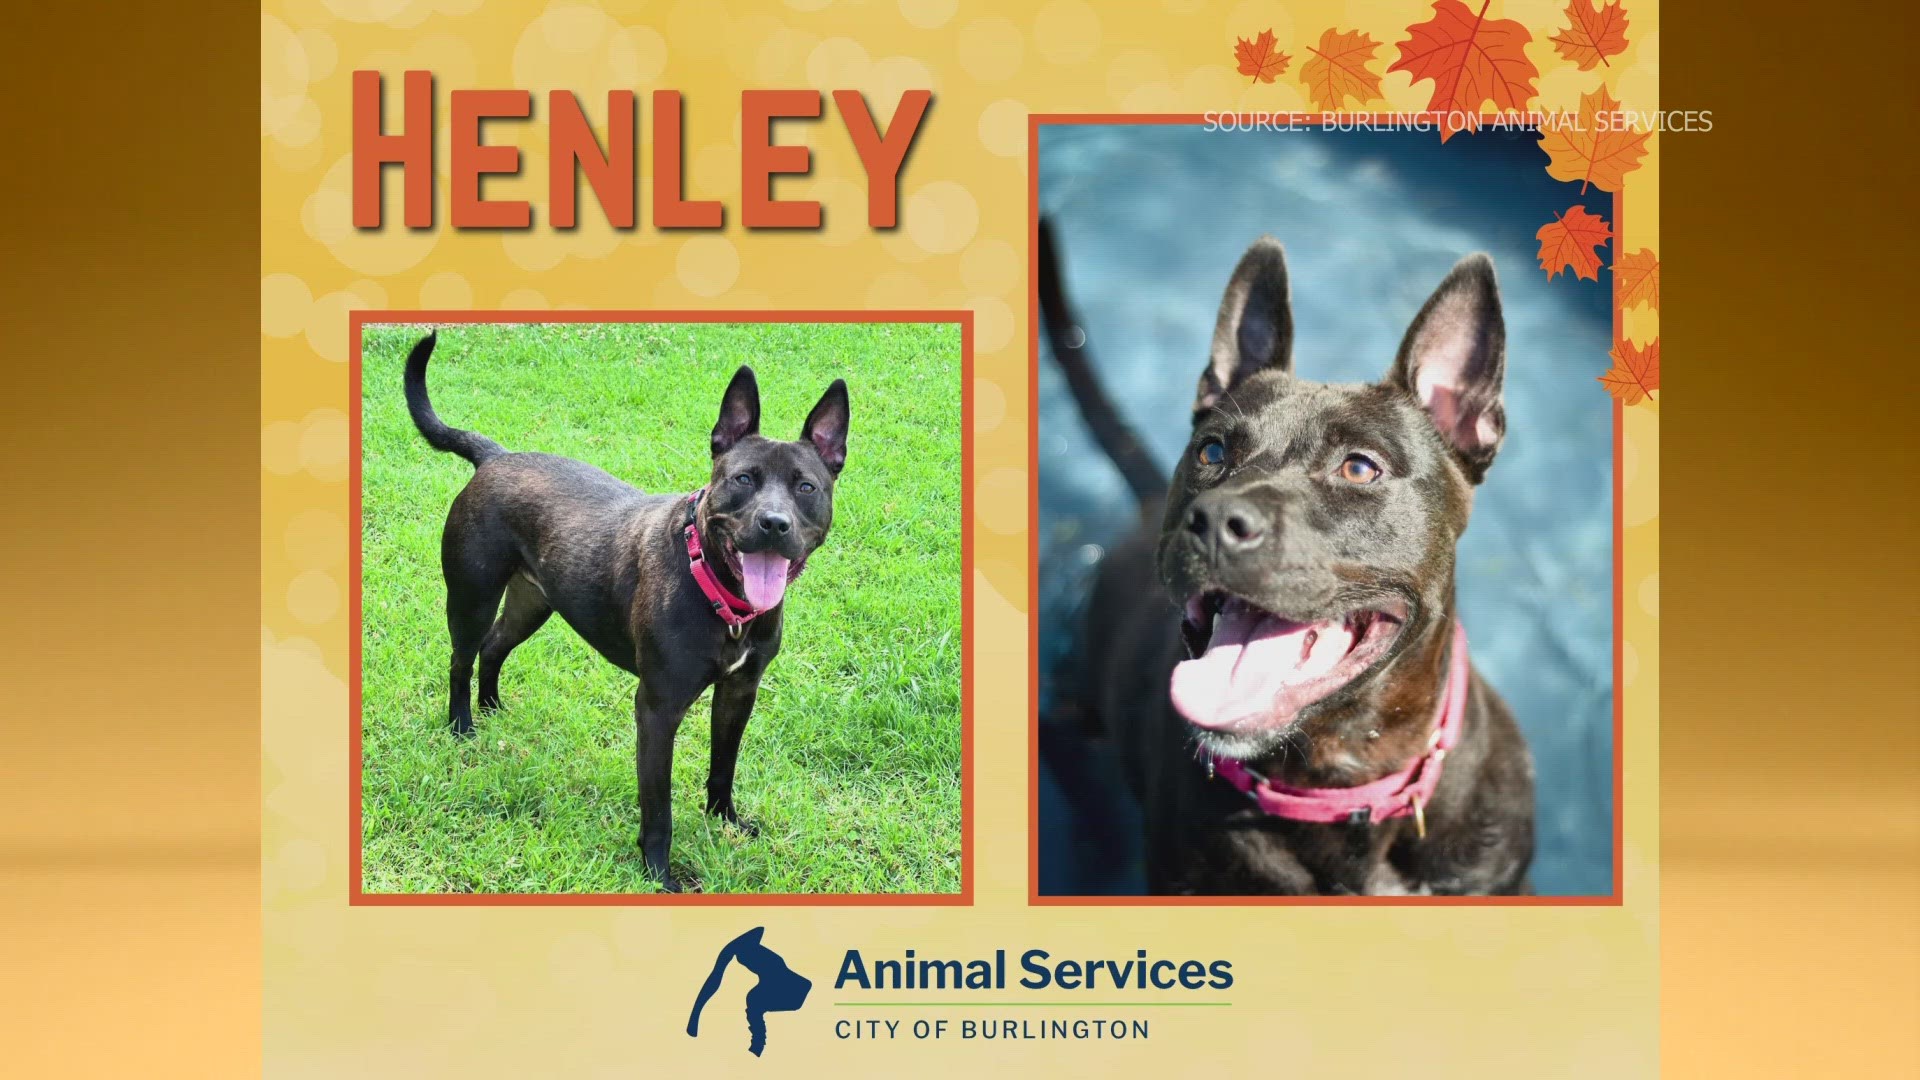 Let’s get Henley adopted!